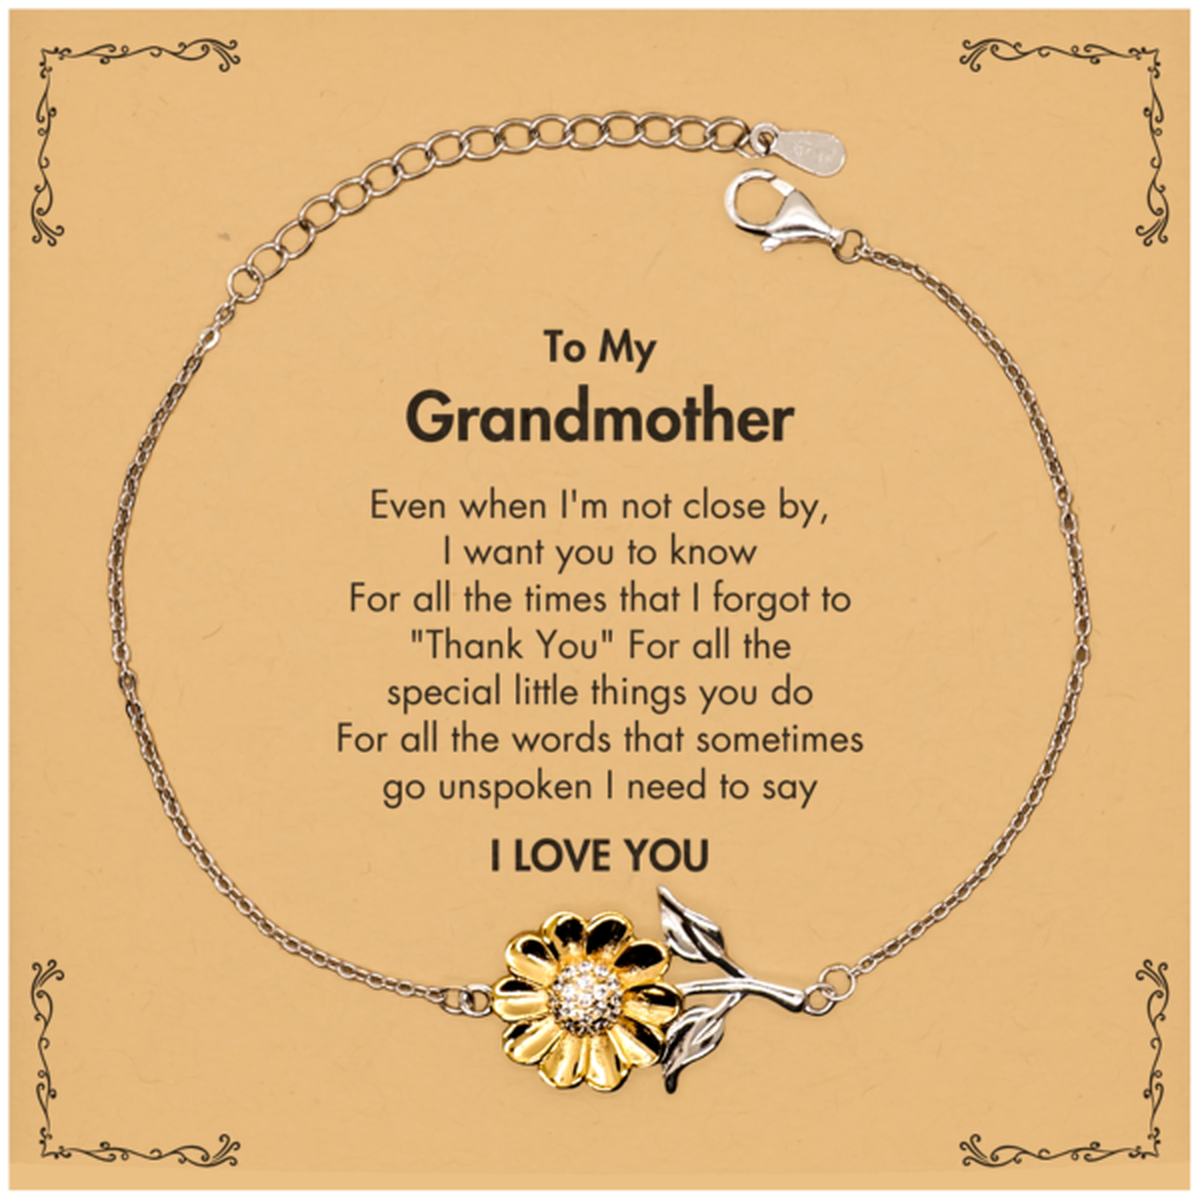 Thank You Gifts for Grandmother, Keepsake Sunflower Bracelet Gifts for Grandmother Birthday Mother's day Father's Day Grandmother For all the words That sometimes go unspoken I need to say I LOVE YOU